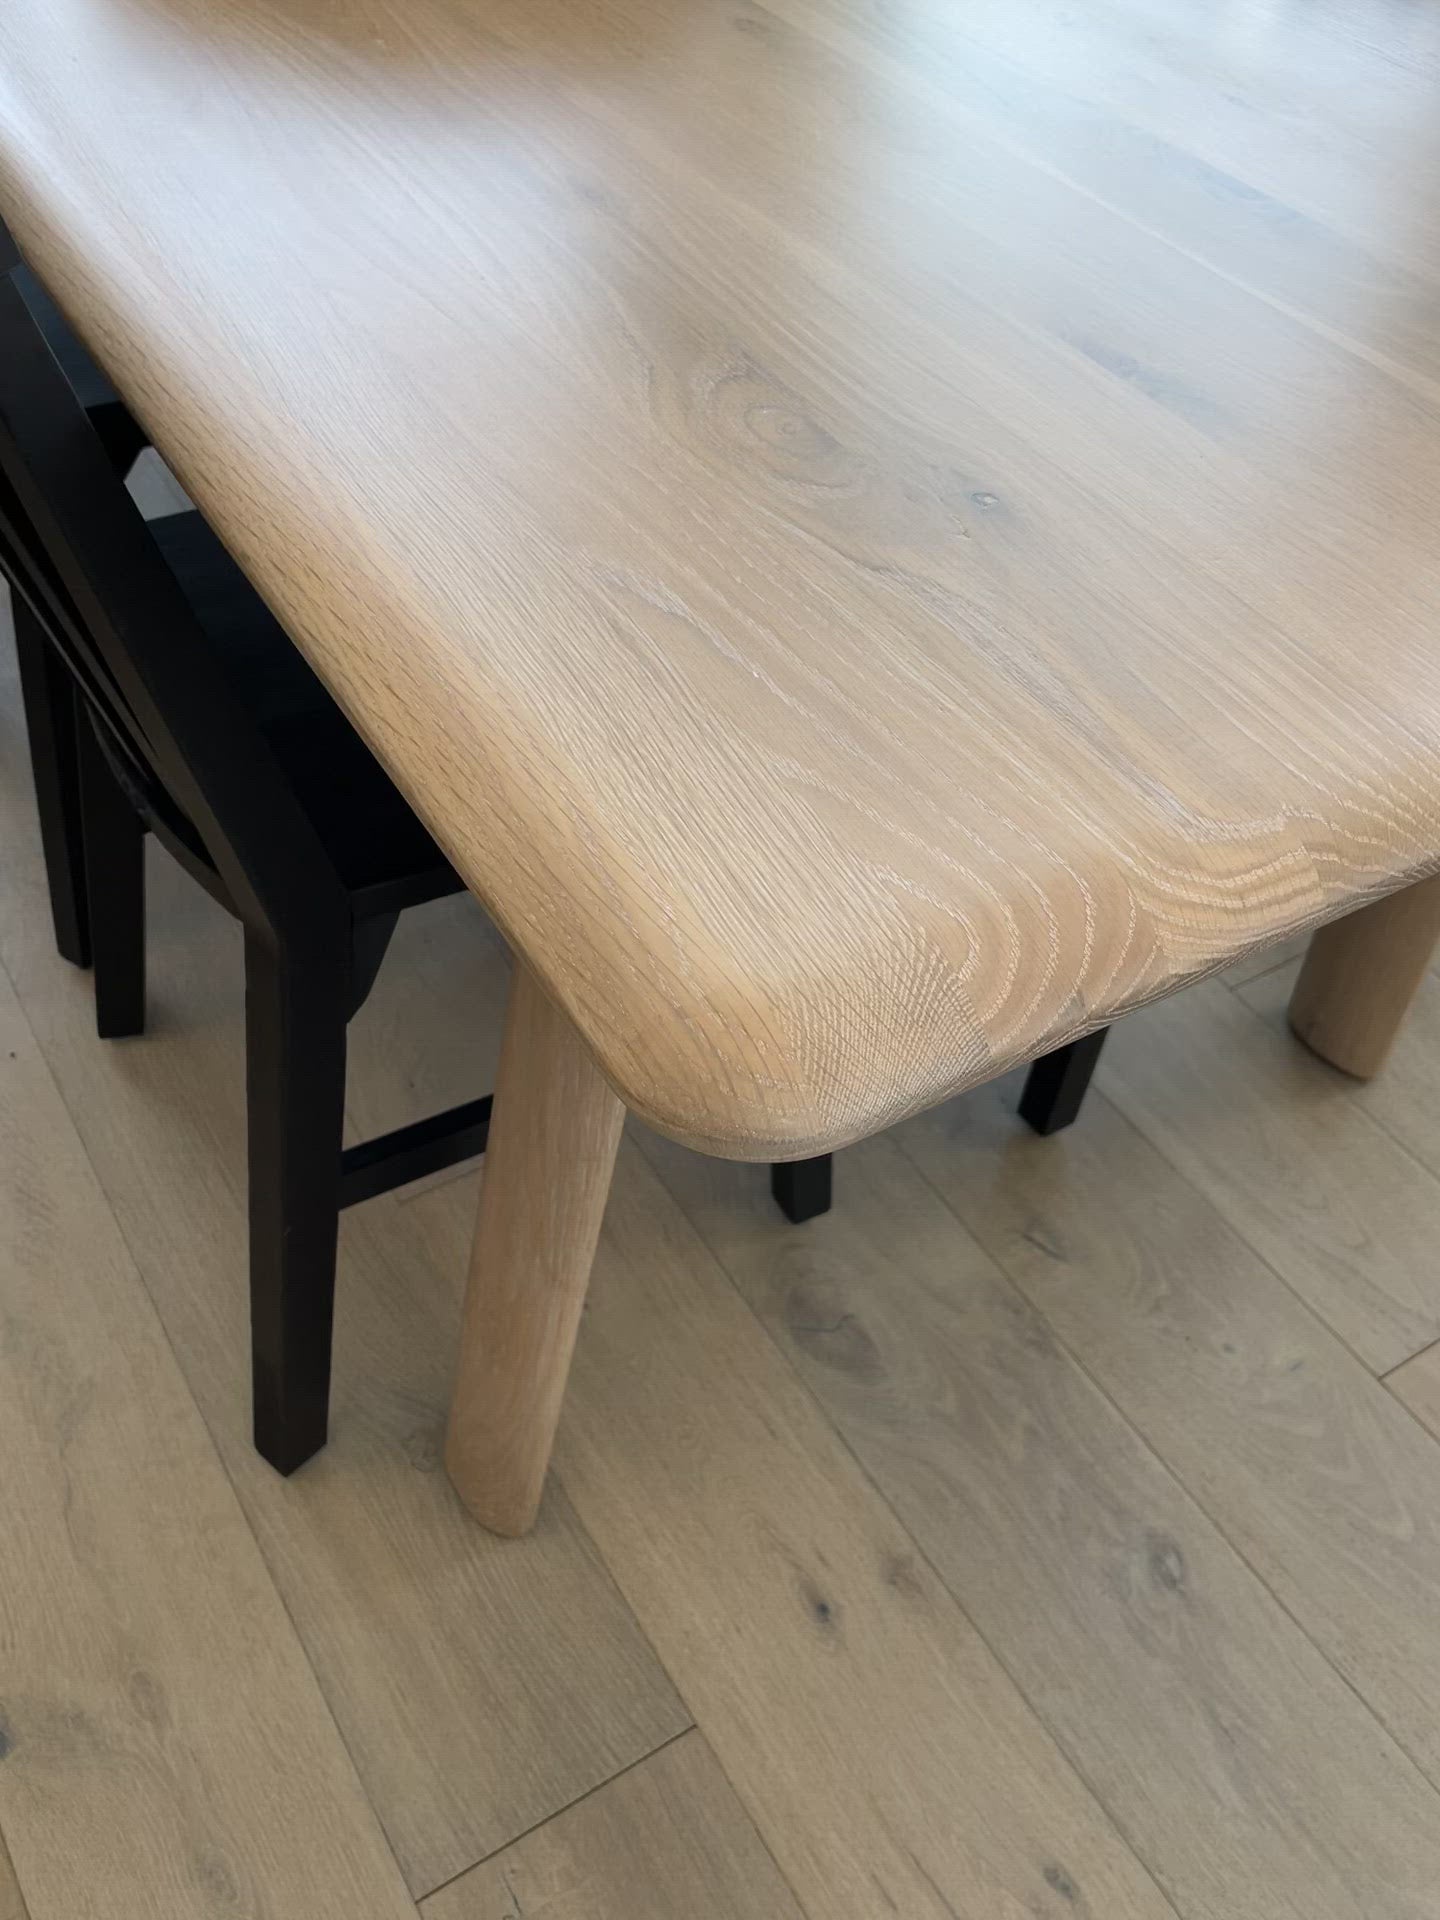 The Malibu dining table embodies an organic aesthetic through its design. Thick pieces of solid white Oak wood is used from head to toe, showing off this pieces beautiful grain pattern and shades. The rounded edges on the legs and table-top creates a flow that is more contemporary and natural. With seating space for 10, the Malibu dining table can host the entire neighborhood.   Dimensions: 88"W x 38"D x 30"H  Materials: Solid White Oak Top and Solid White Oak Legs